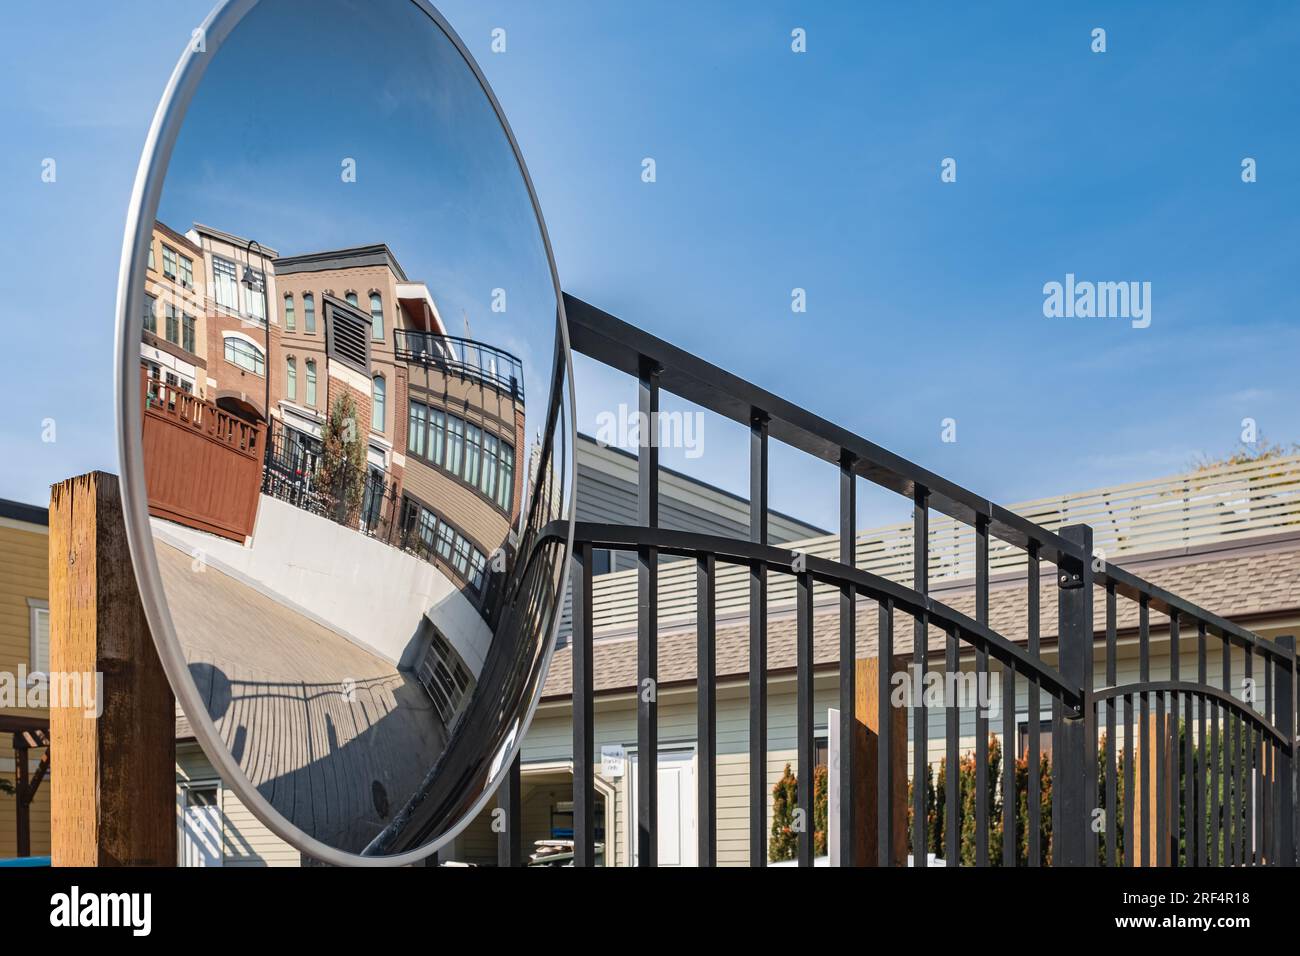 Round mirror for inspection. A viewing mirror in the parking lot. A spherical large convex mirror on the street road for improving visibility. Convex Stock Photo